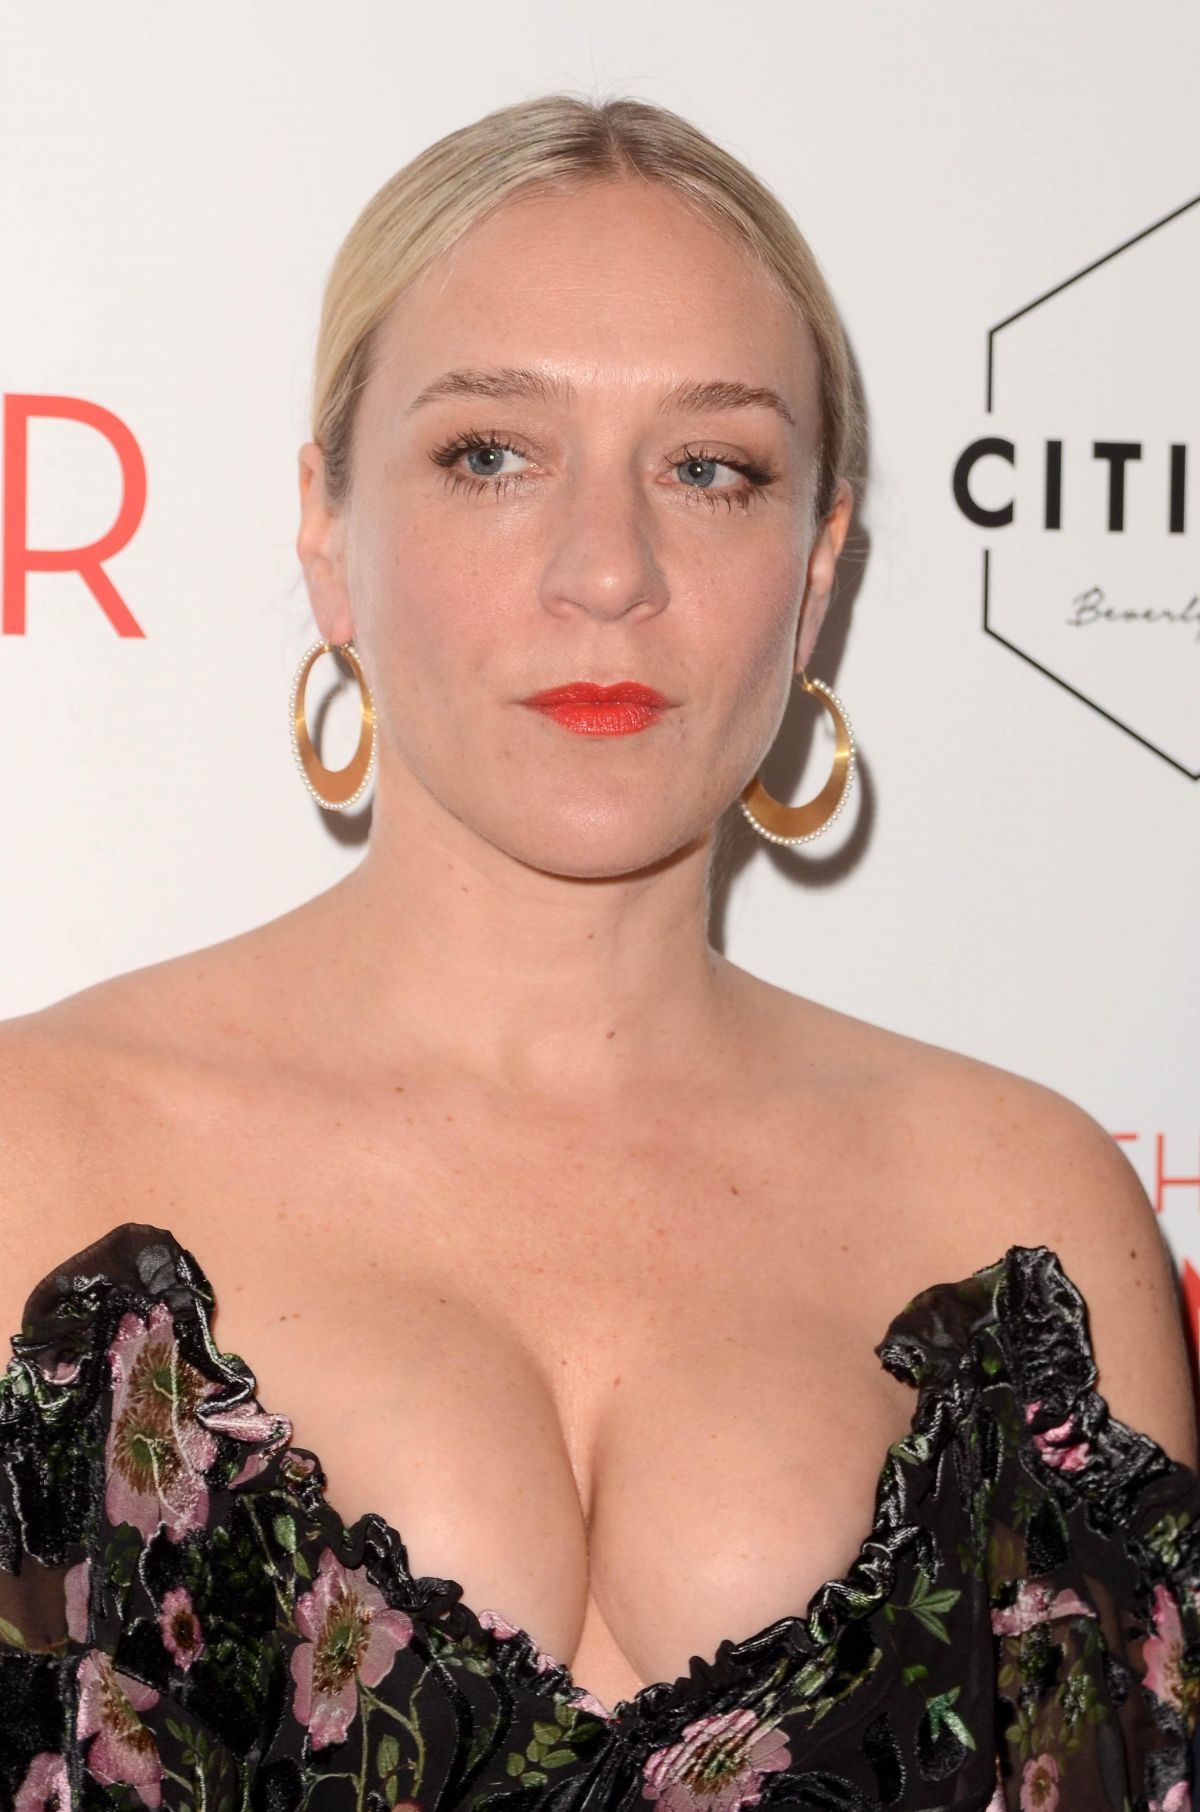 CHLOE SEVIGNY at The Dinner Premiere in Los Angeles 05/01 ...